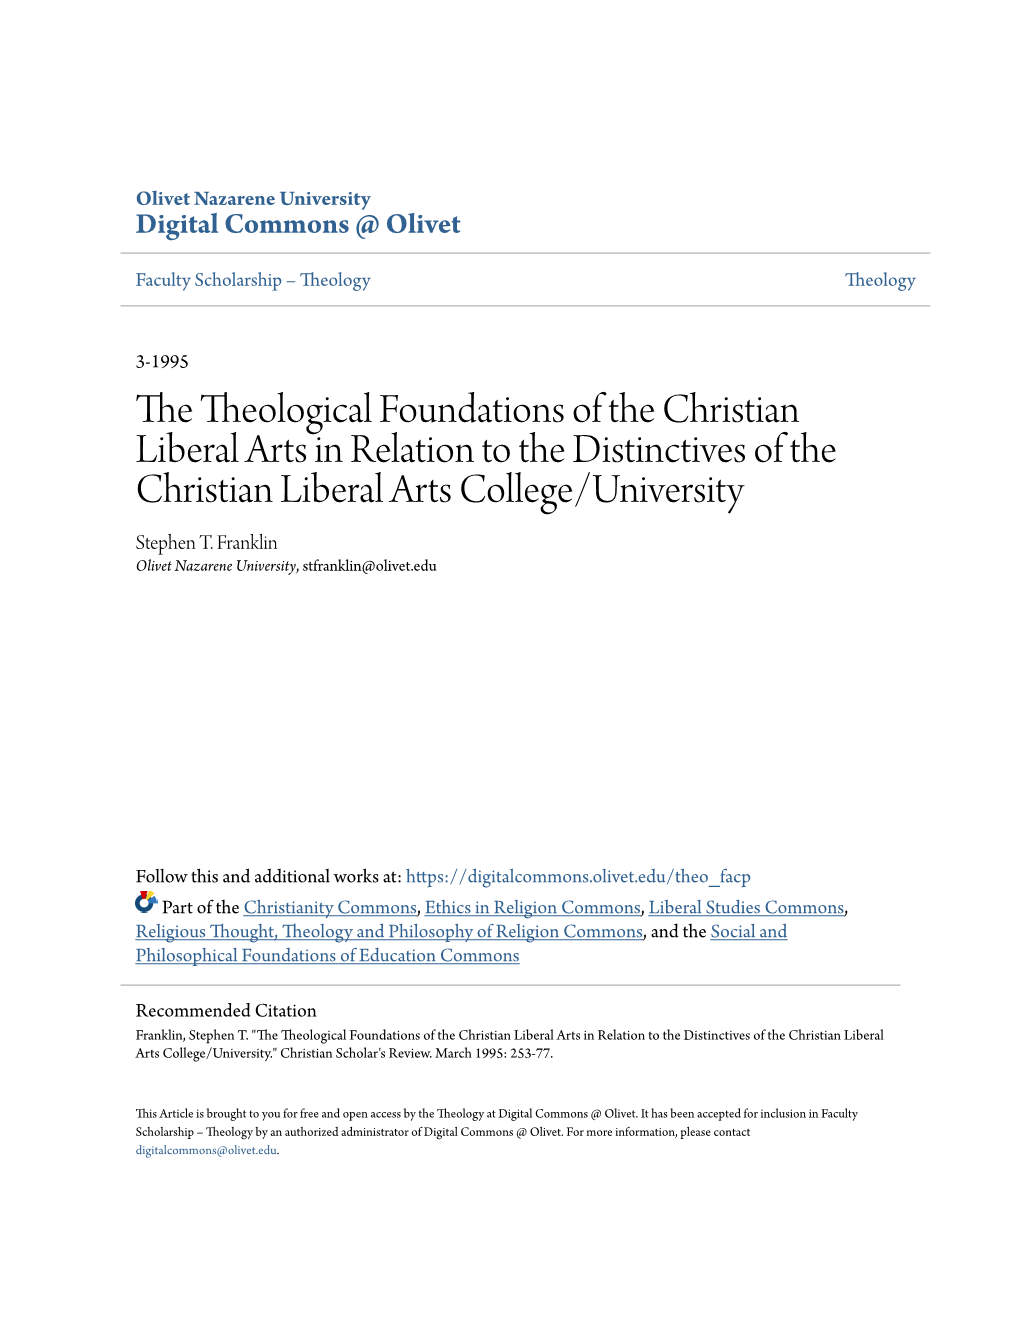 The Theological Foundations of the Christian Liberal Arts in Relation to the Distinctives of the Christian Liberal Arts College/University Stephen T